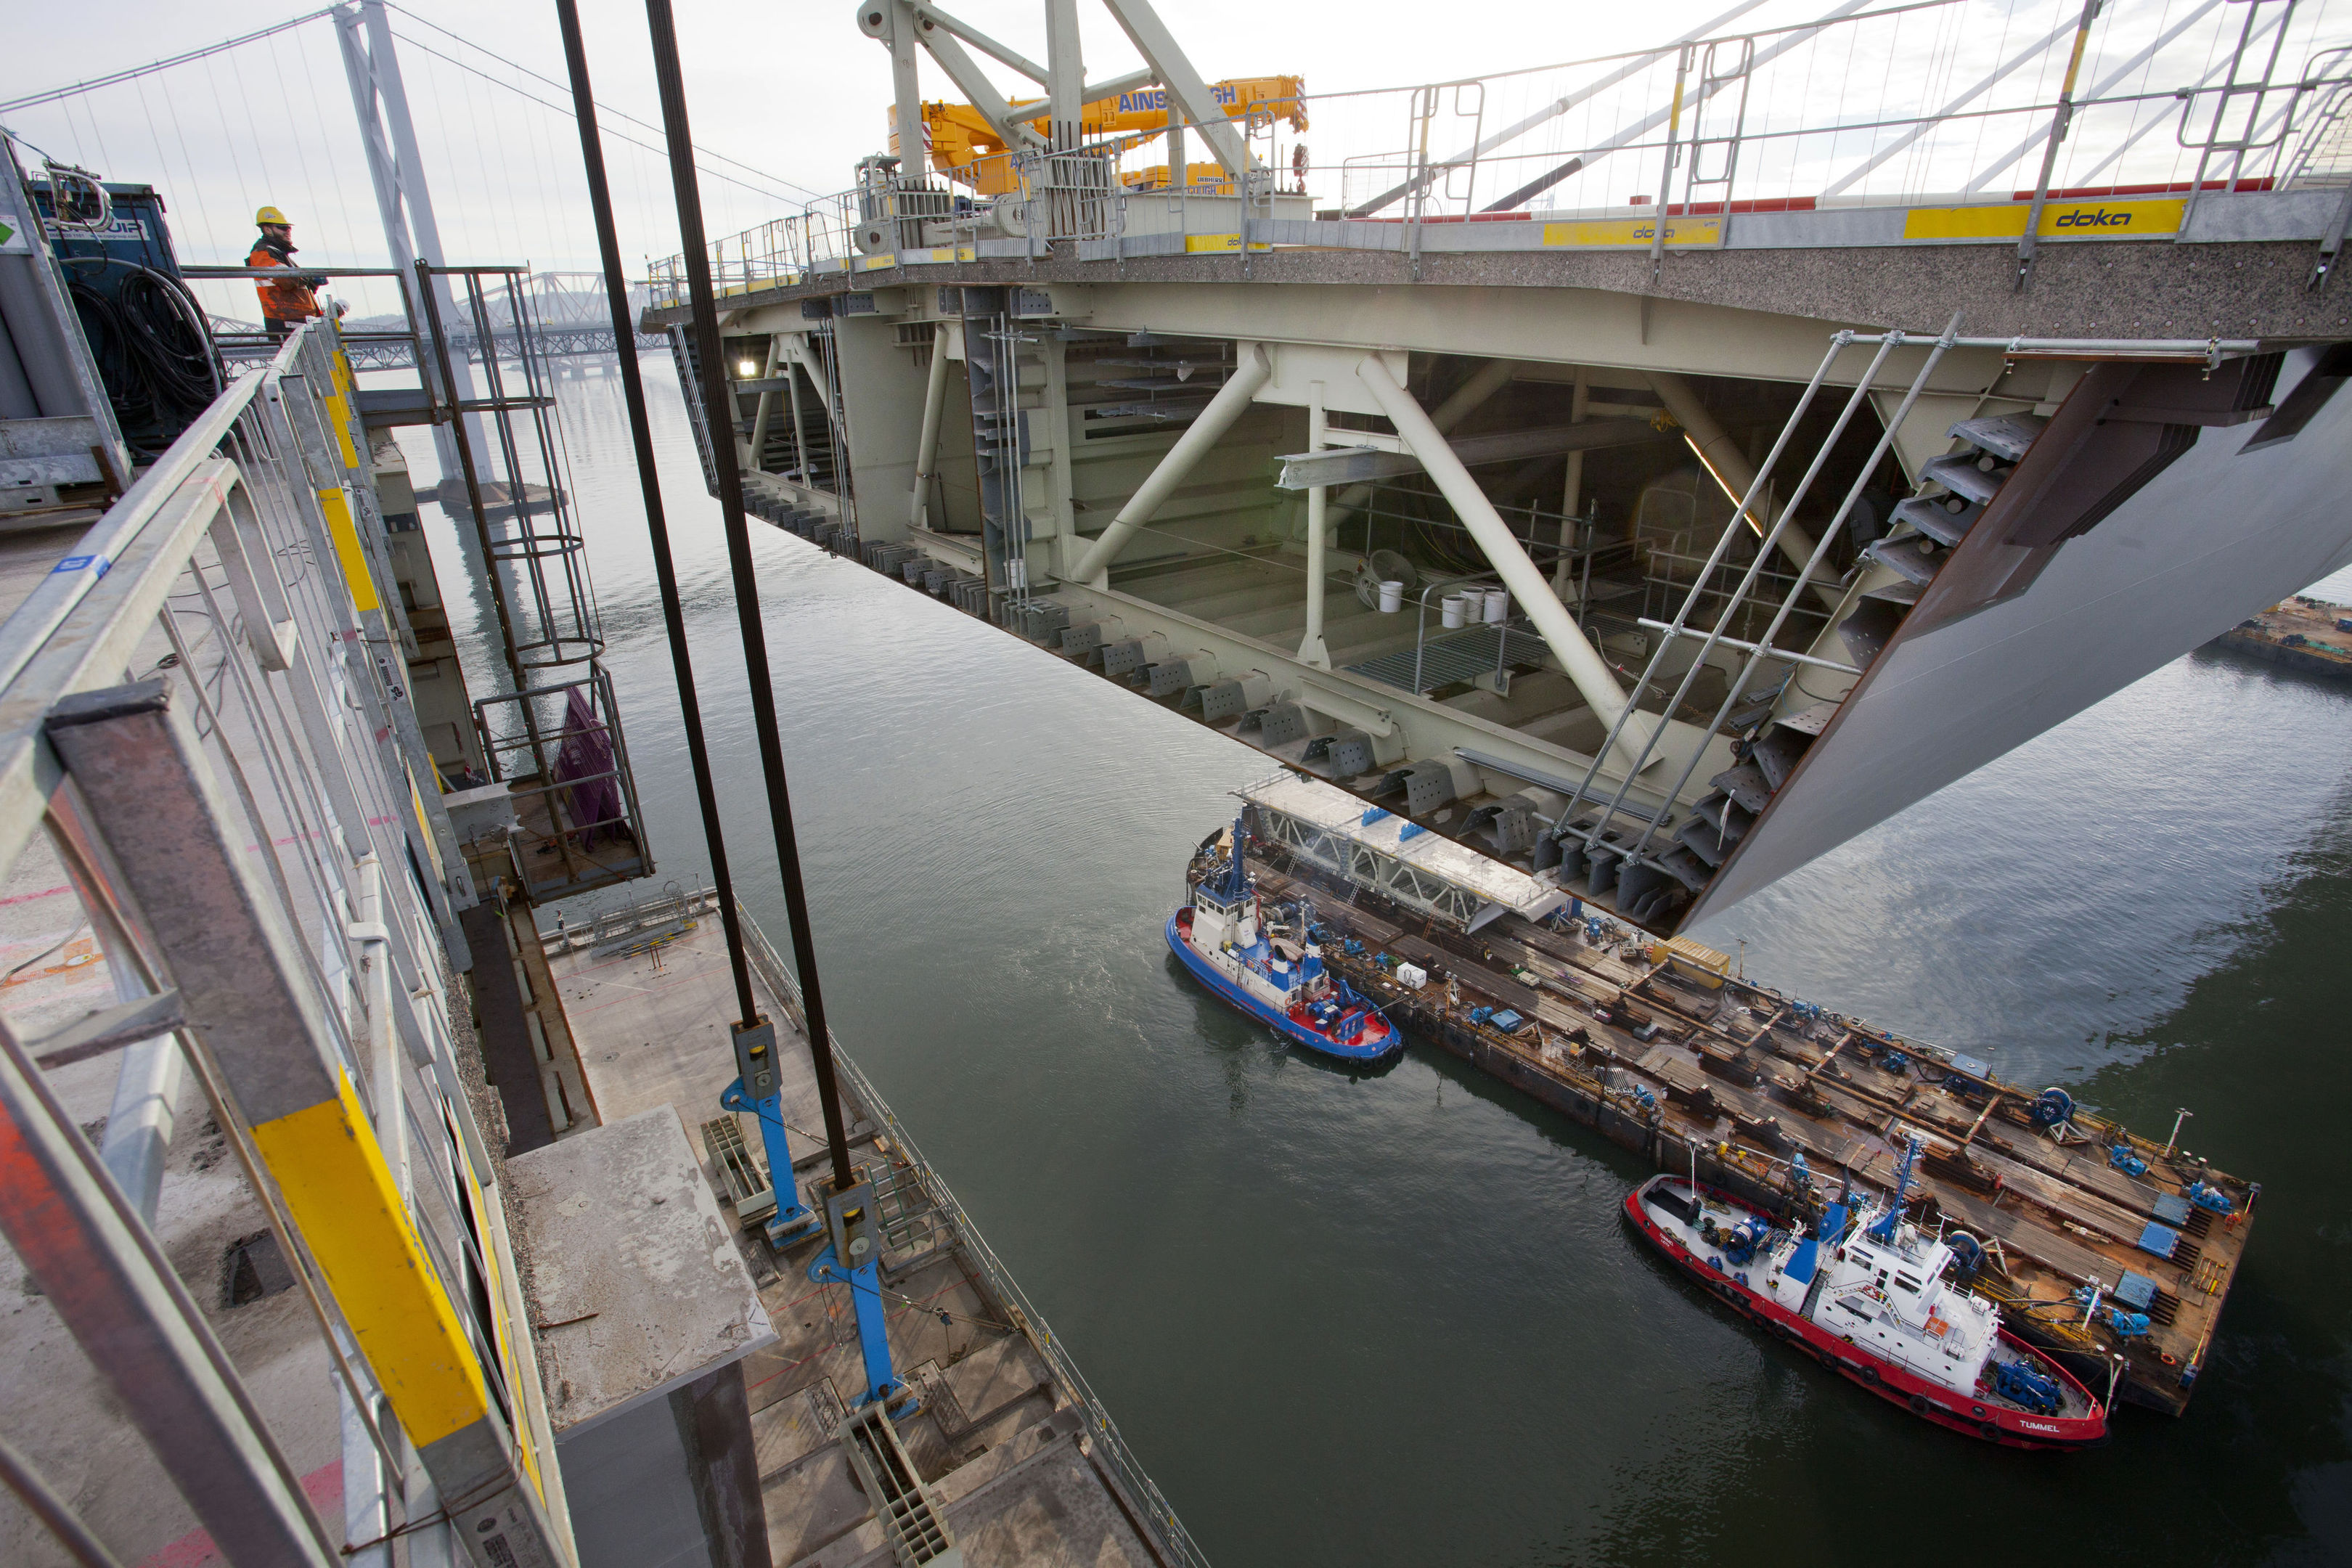 Engineers have lifted into place the final deck segment connecting the centre and north towers of the £1.3 billion new Forth crossing.